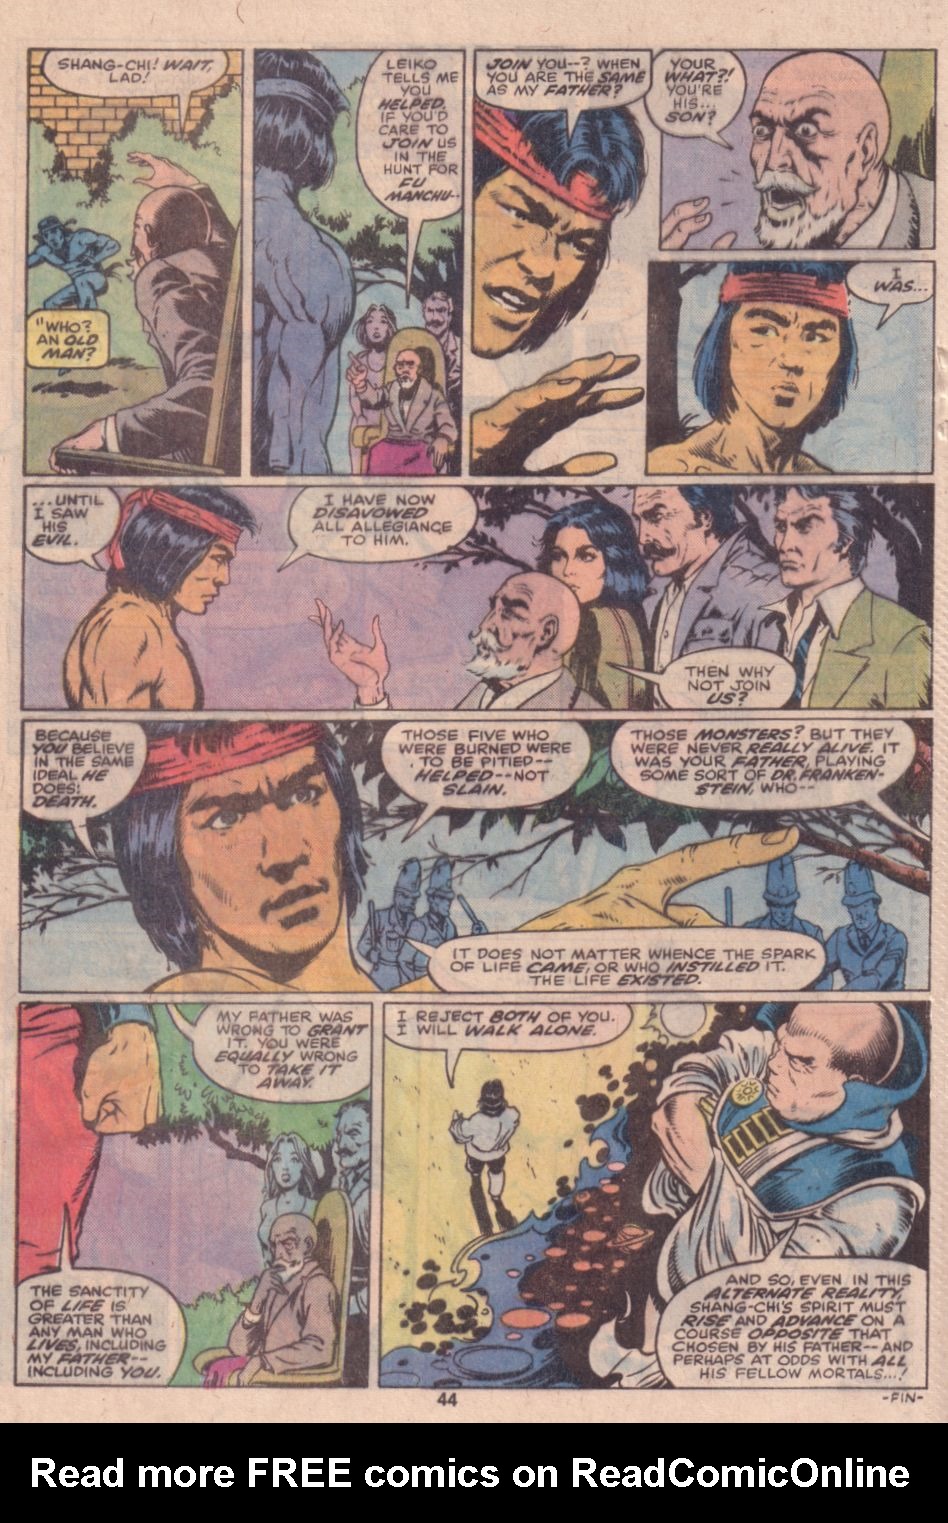 What If? (1977) Issue #16 - Shang Chi Master of Kung Fu fought on The side of Fu Manchu #16 - English 34